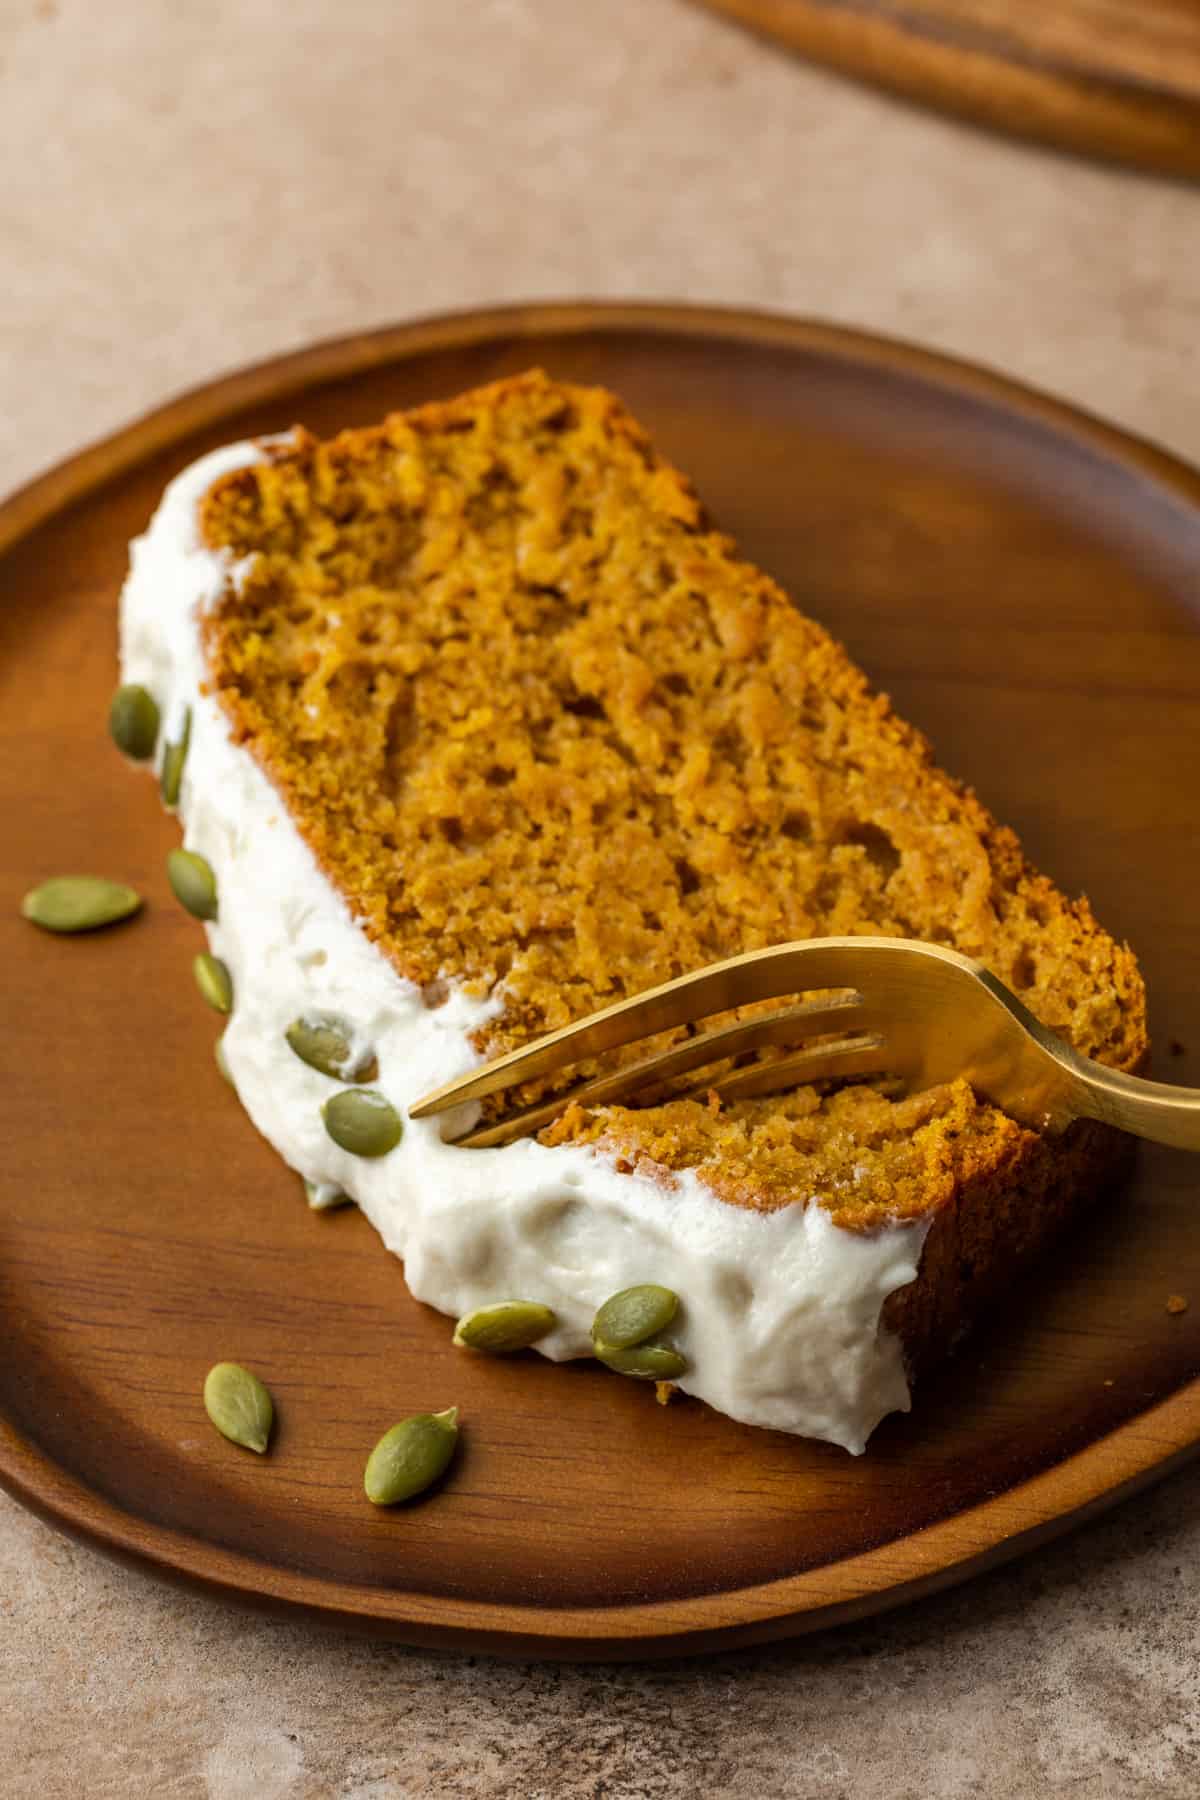 Pumpkin bread being sliced into with a fork.